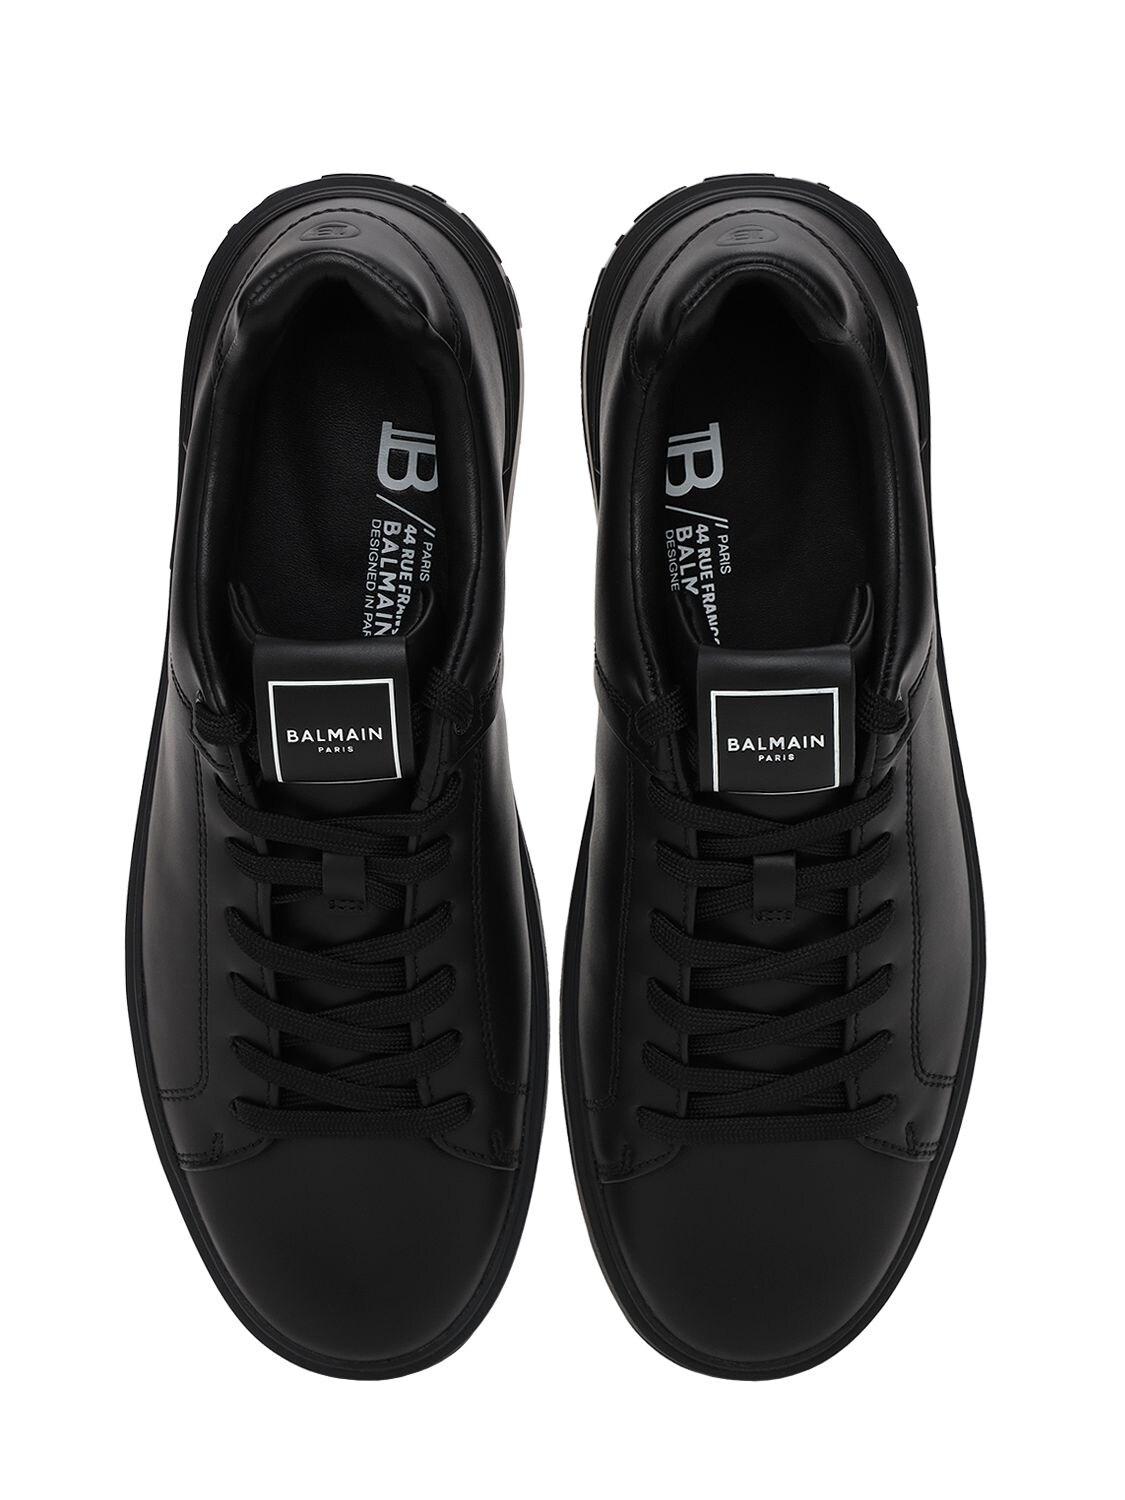 Balmain B Court Leather Low Top Sneakers in Black for Men - Lyst